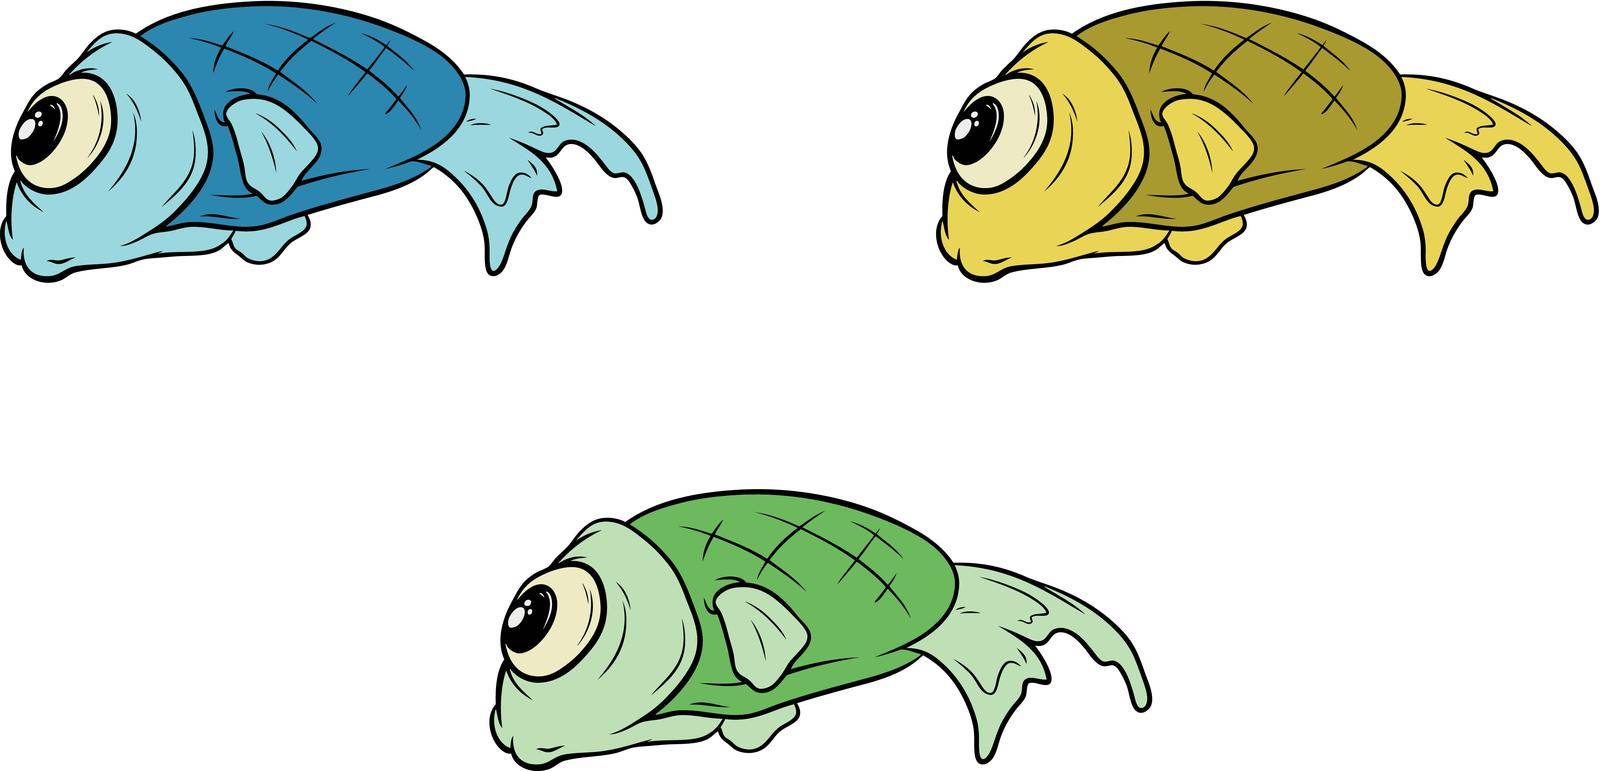 Cartoon set of different fish by GB_Art